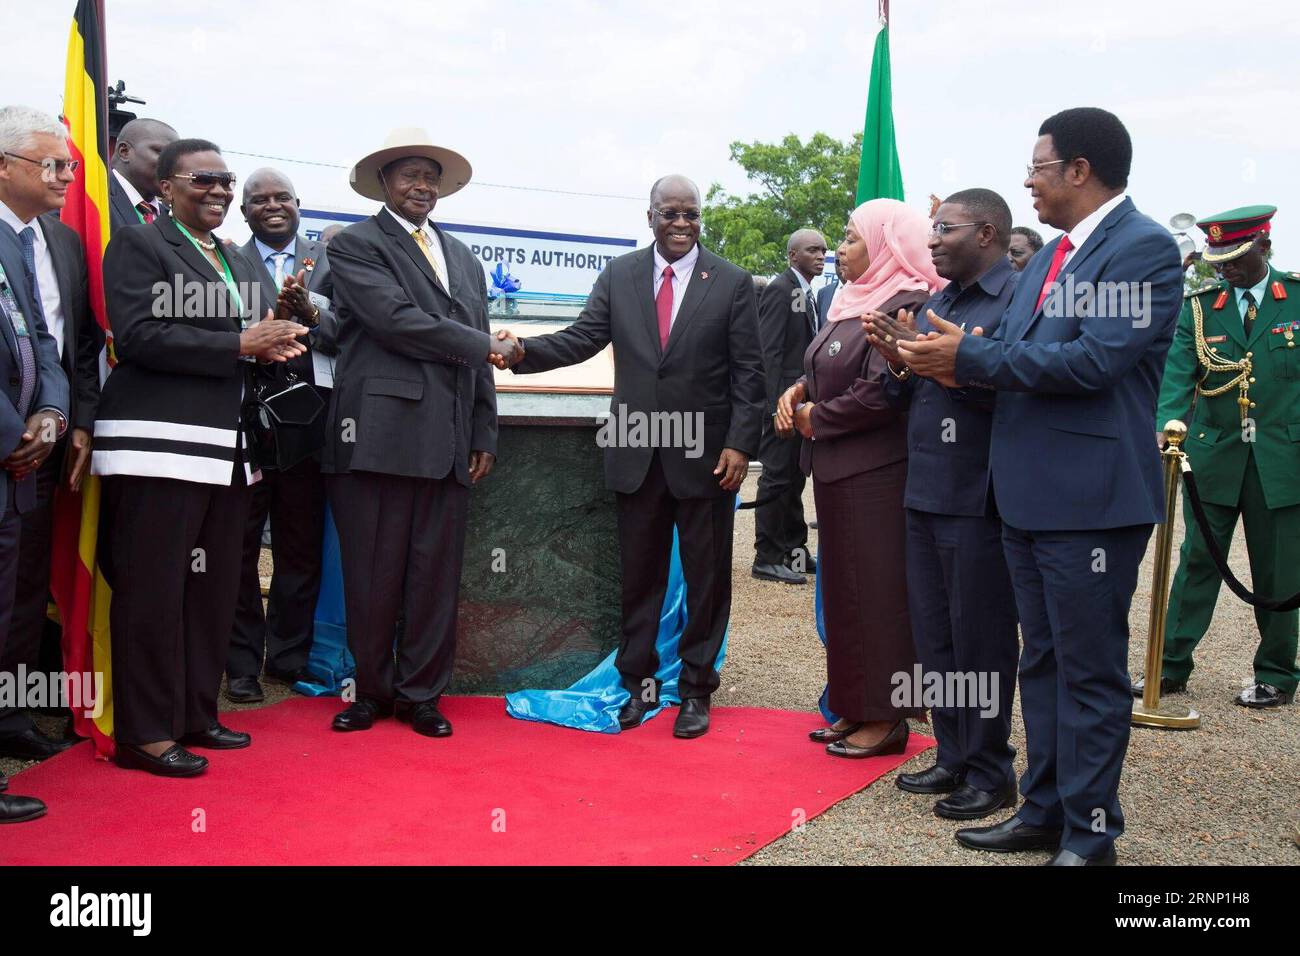 (170806) -- ARUSHA, Aug. 6, 2017 -- Tanzanian President John Magufuli (R, Center) and his Ugandan counterpart Yoweri Museveni(L,Center) lay the foundation stone for the construction of a crude oil pipeline from Hoima in Uganda to Tanzania s Indian Ocean seaport of Tanga in Tanga, Tanzania, Aug. 5, 2017. ) (yk) TANZANIA-ARUSHA-OIL PIPELINE-FOUNDATION Stringer PUBLICATIONxNOTxINxCHN   Arusha Aug 6 2017 Tanzanian President John Magufuli r Center and His Ugandan Part Yoweri Museveni Veni l Center Lay The Foundation Stone for The Construction of a Crude Oil Pipeline from  in Uganda to Tanzania S In Stock Photo